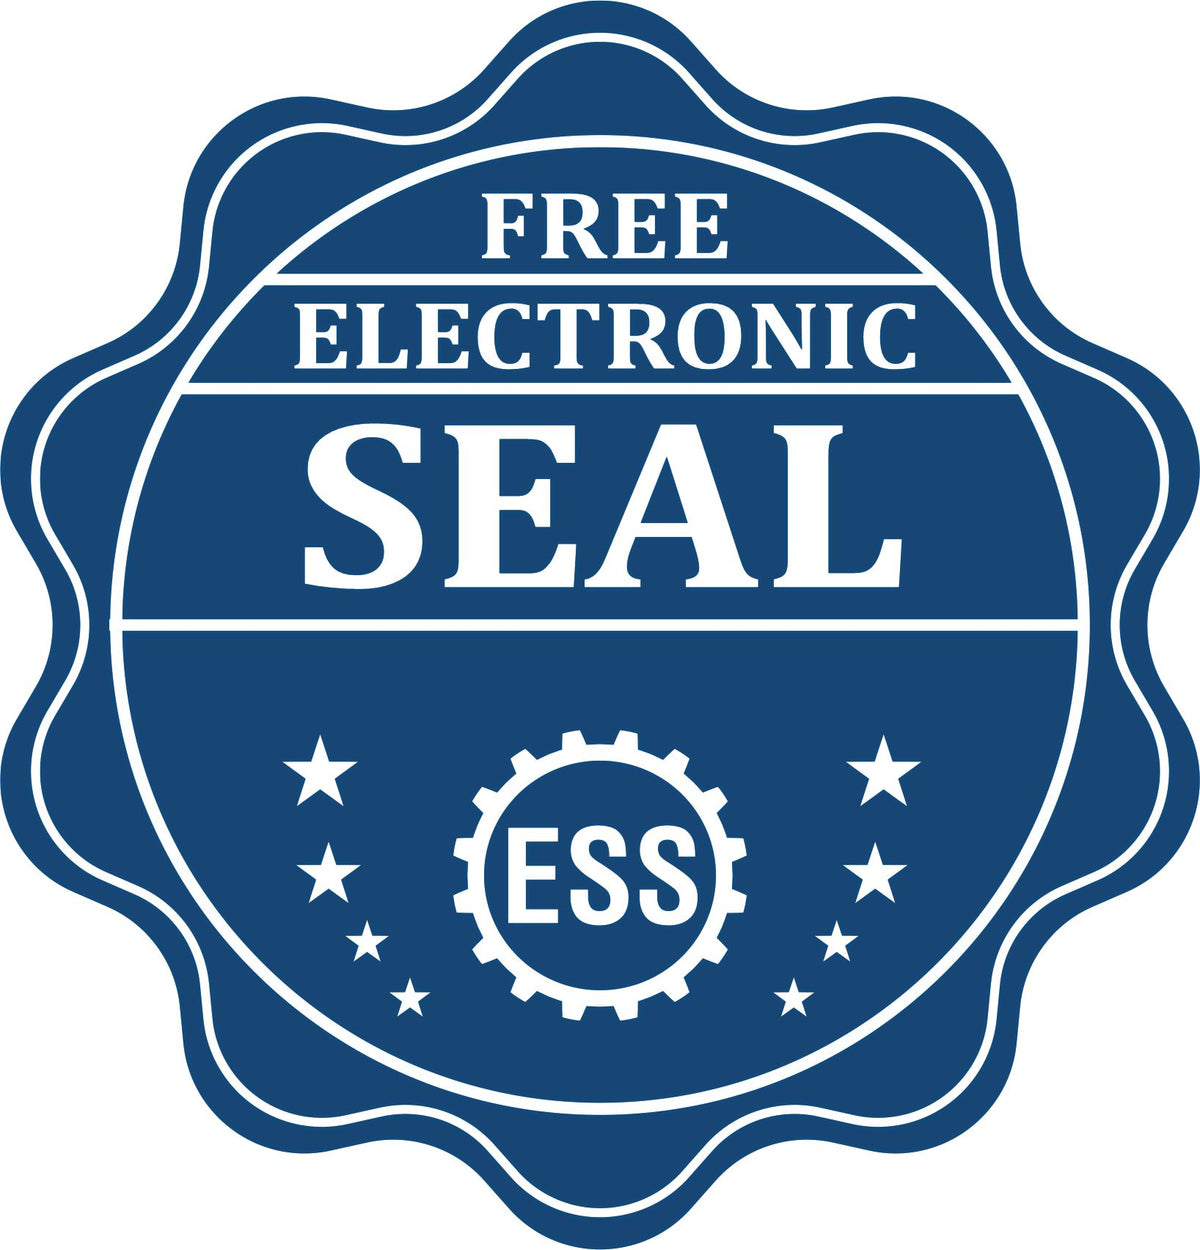 A badge showing a free electronic seal for the Texas Engineer Desk Seal with stars and the ESS gear on the emblem.